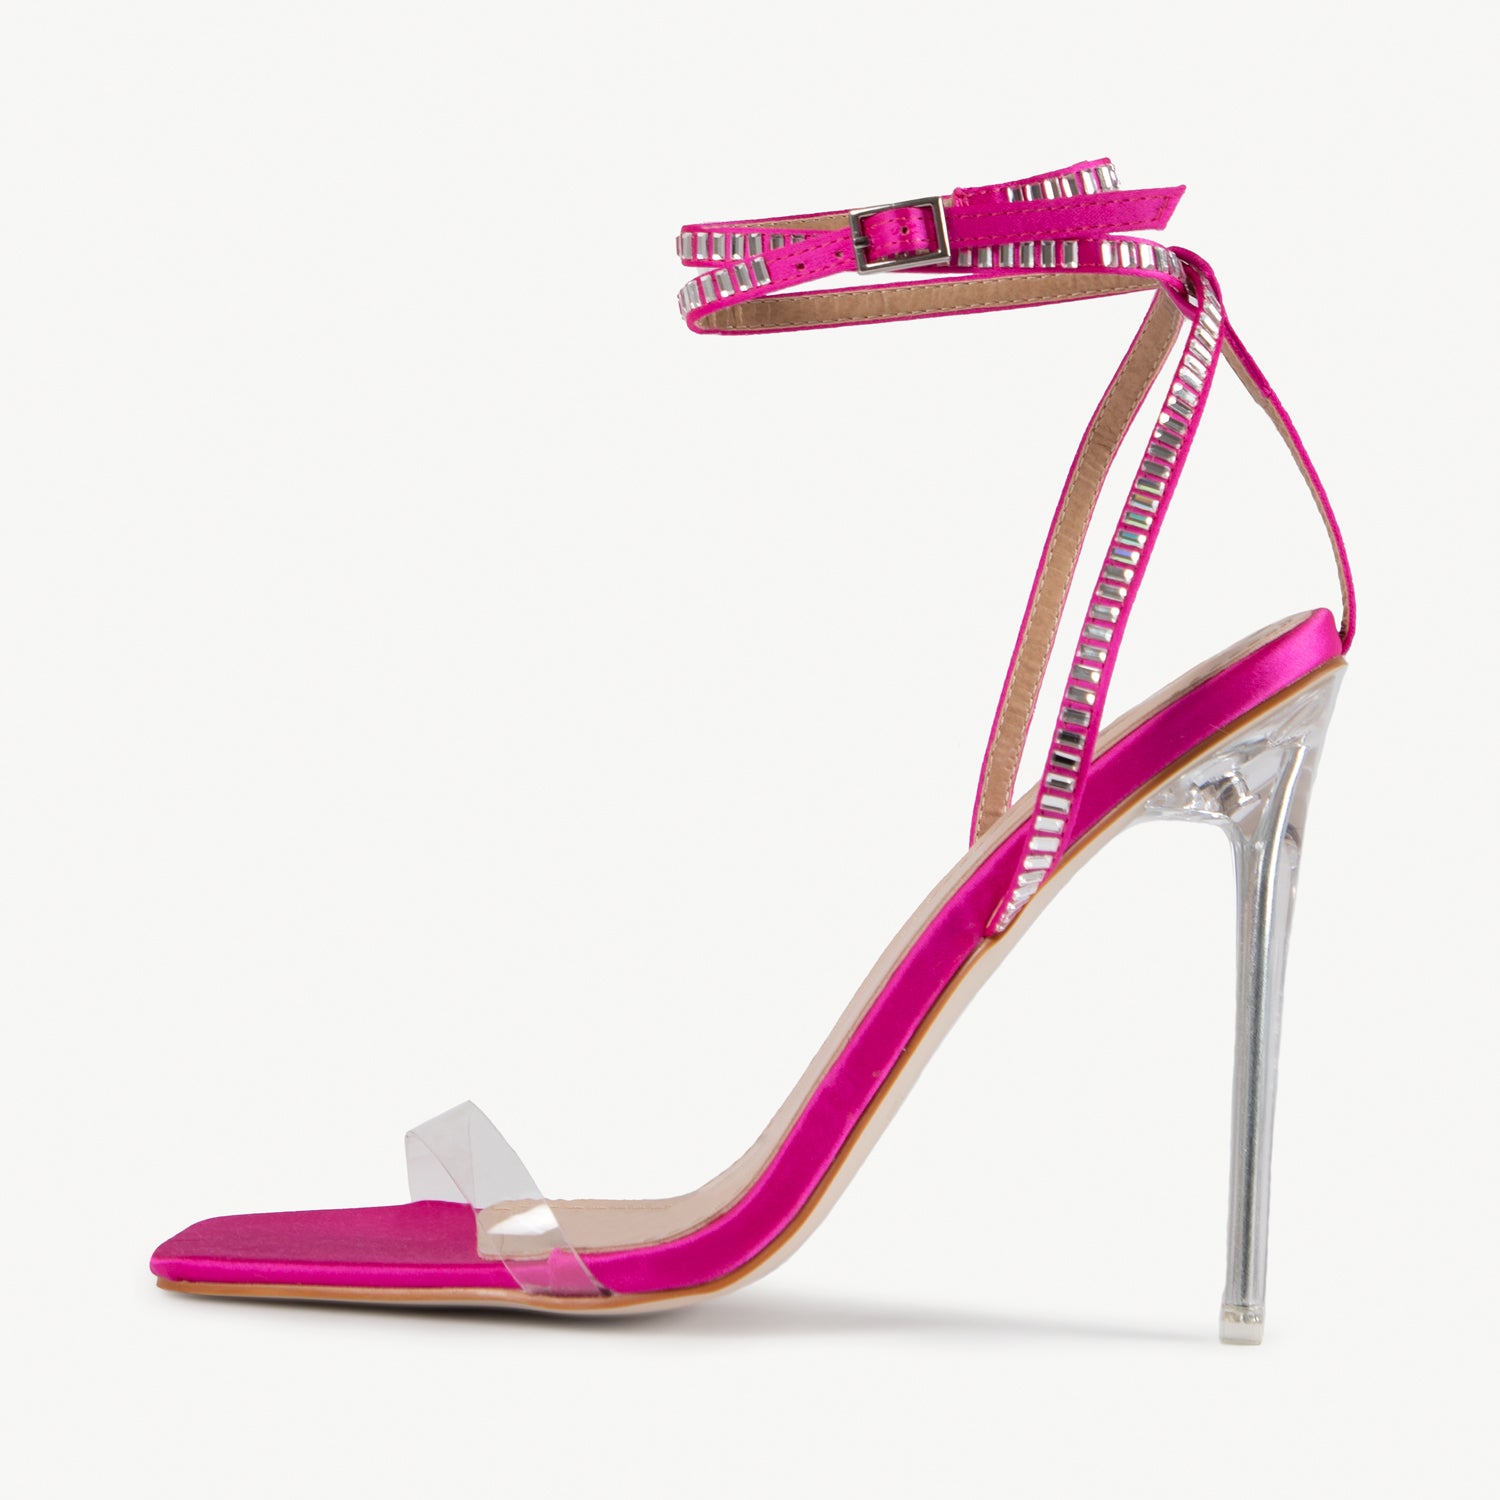 RAID Madrona Strappy Heel in Pink Satin